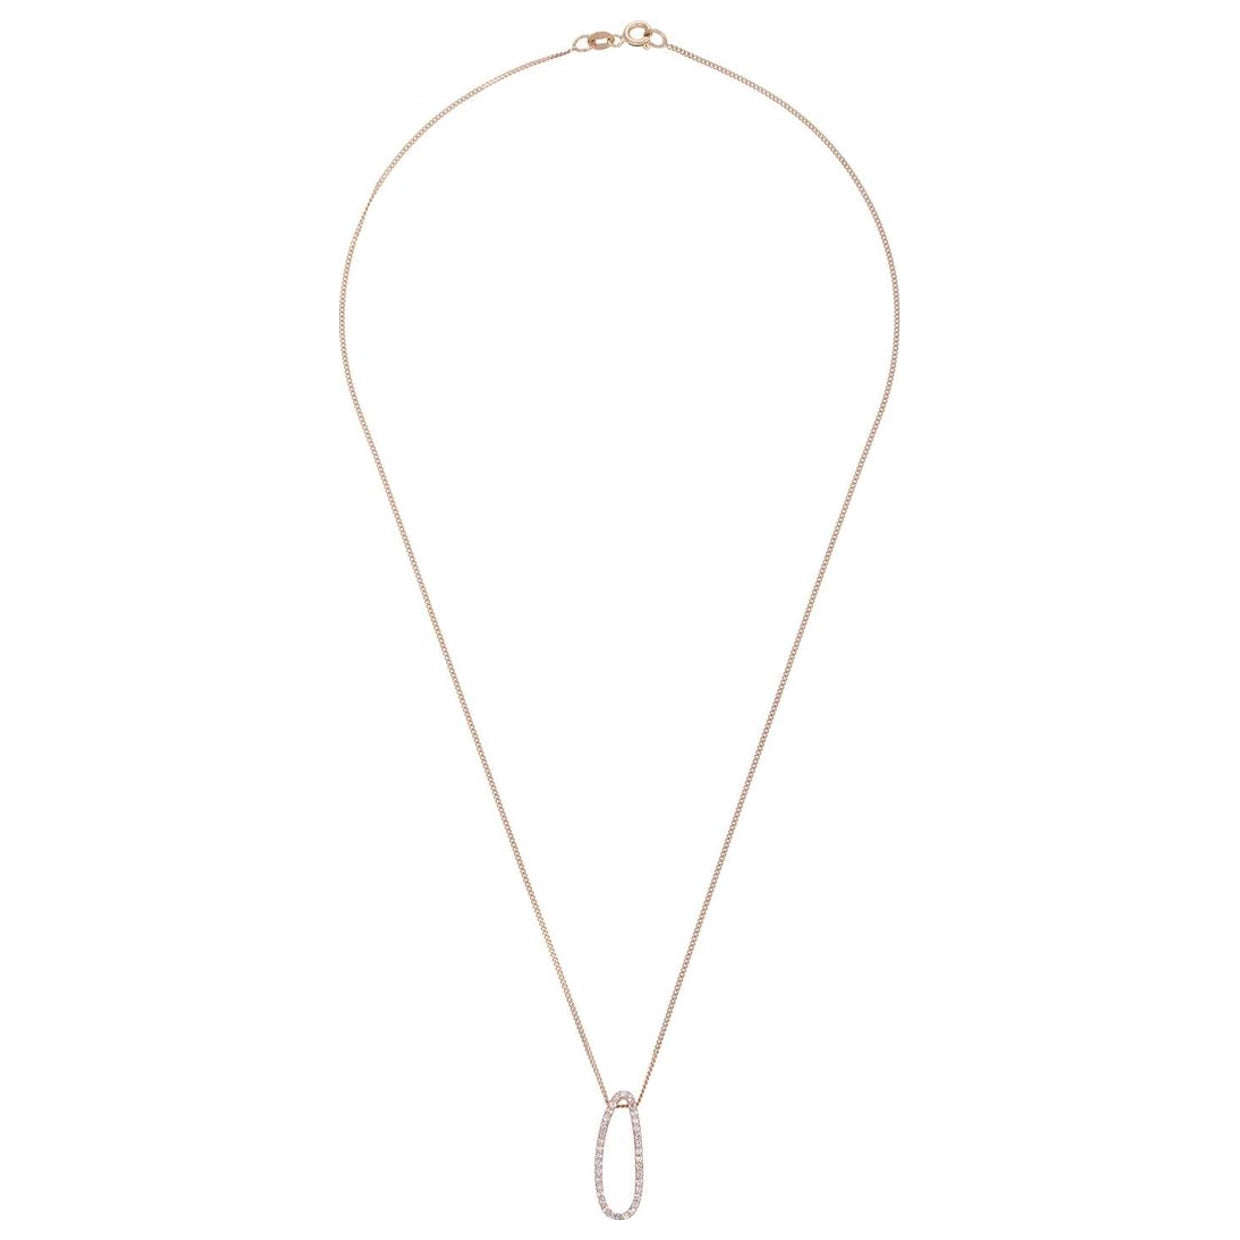 Drop Gold Necklace with Diamond Stones